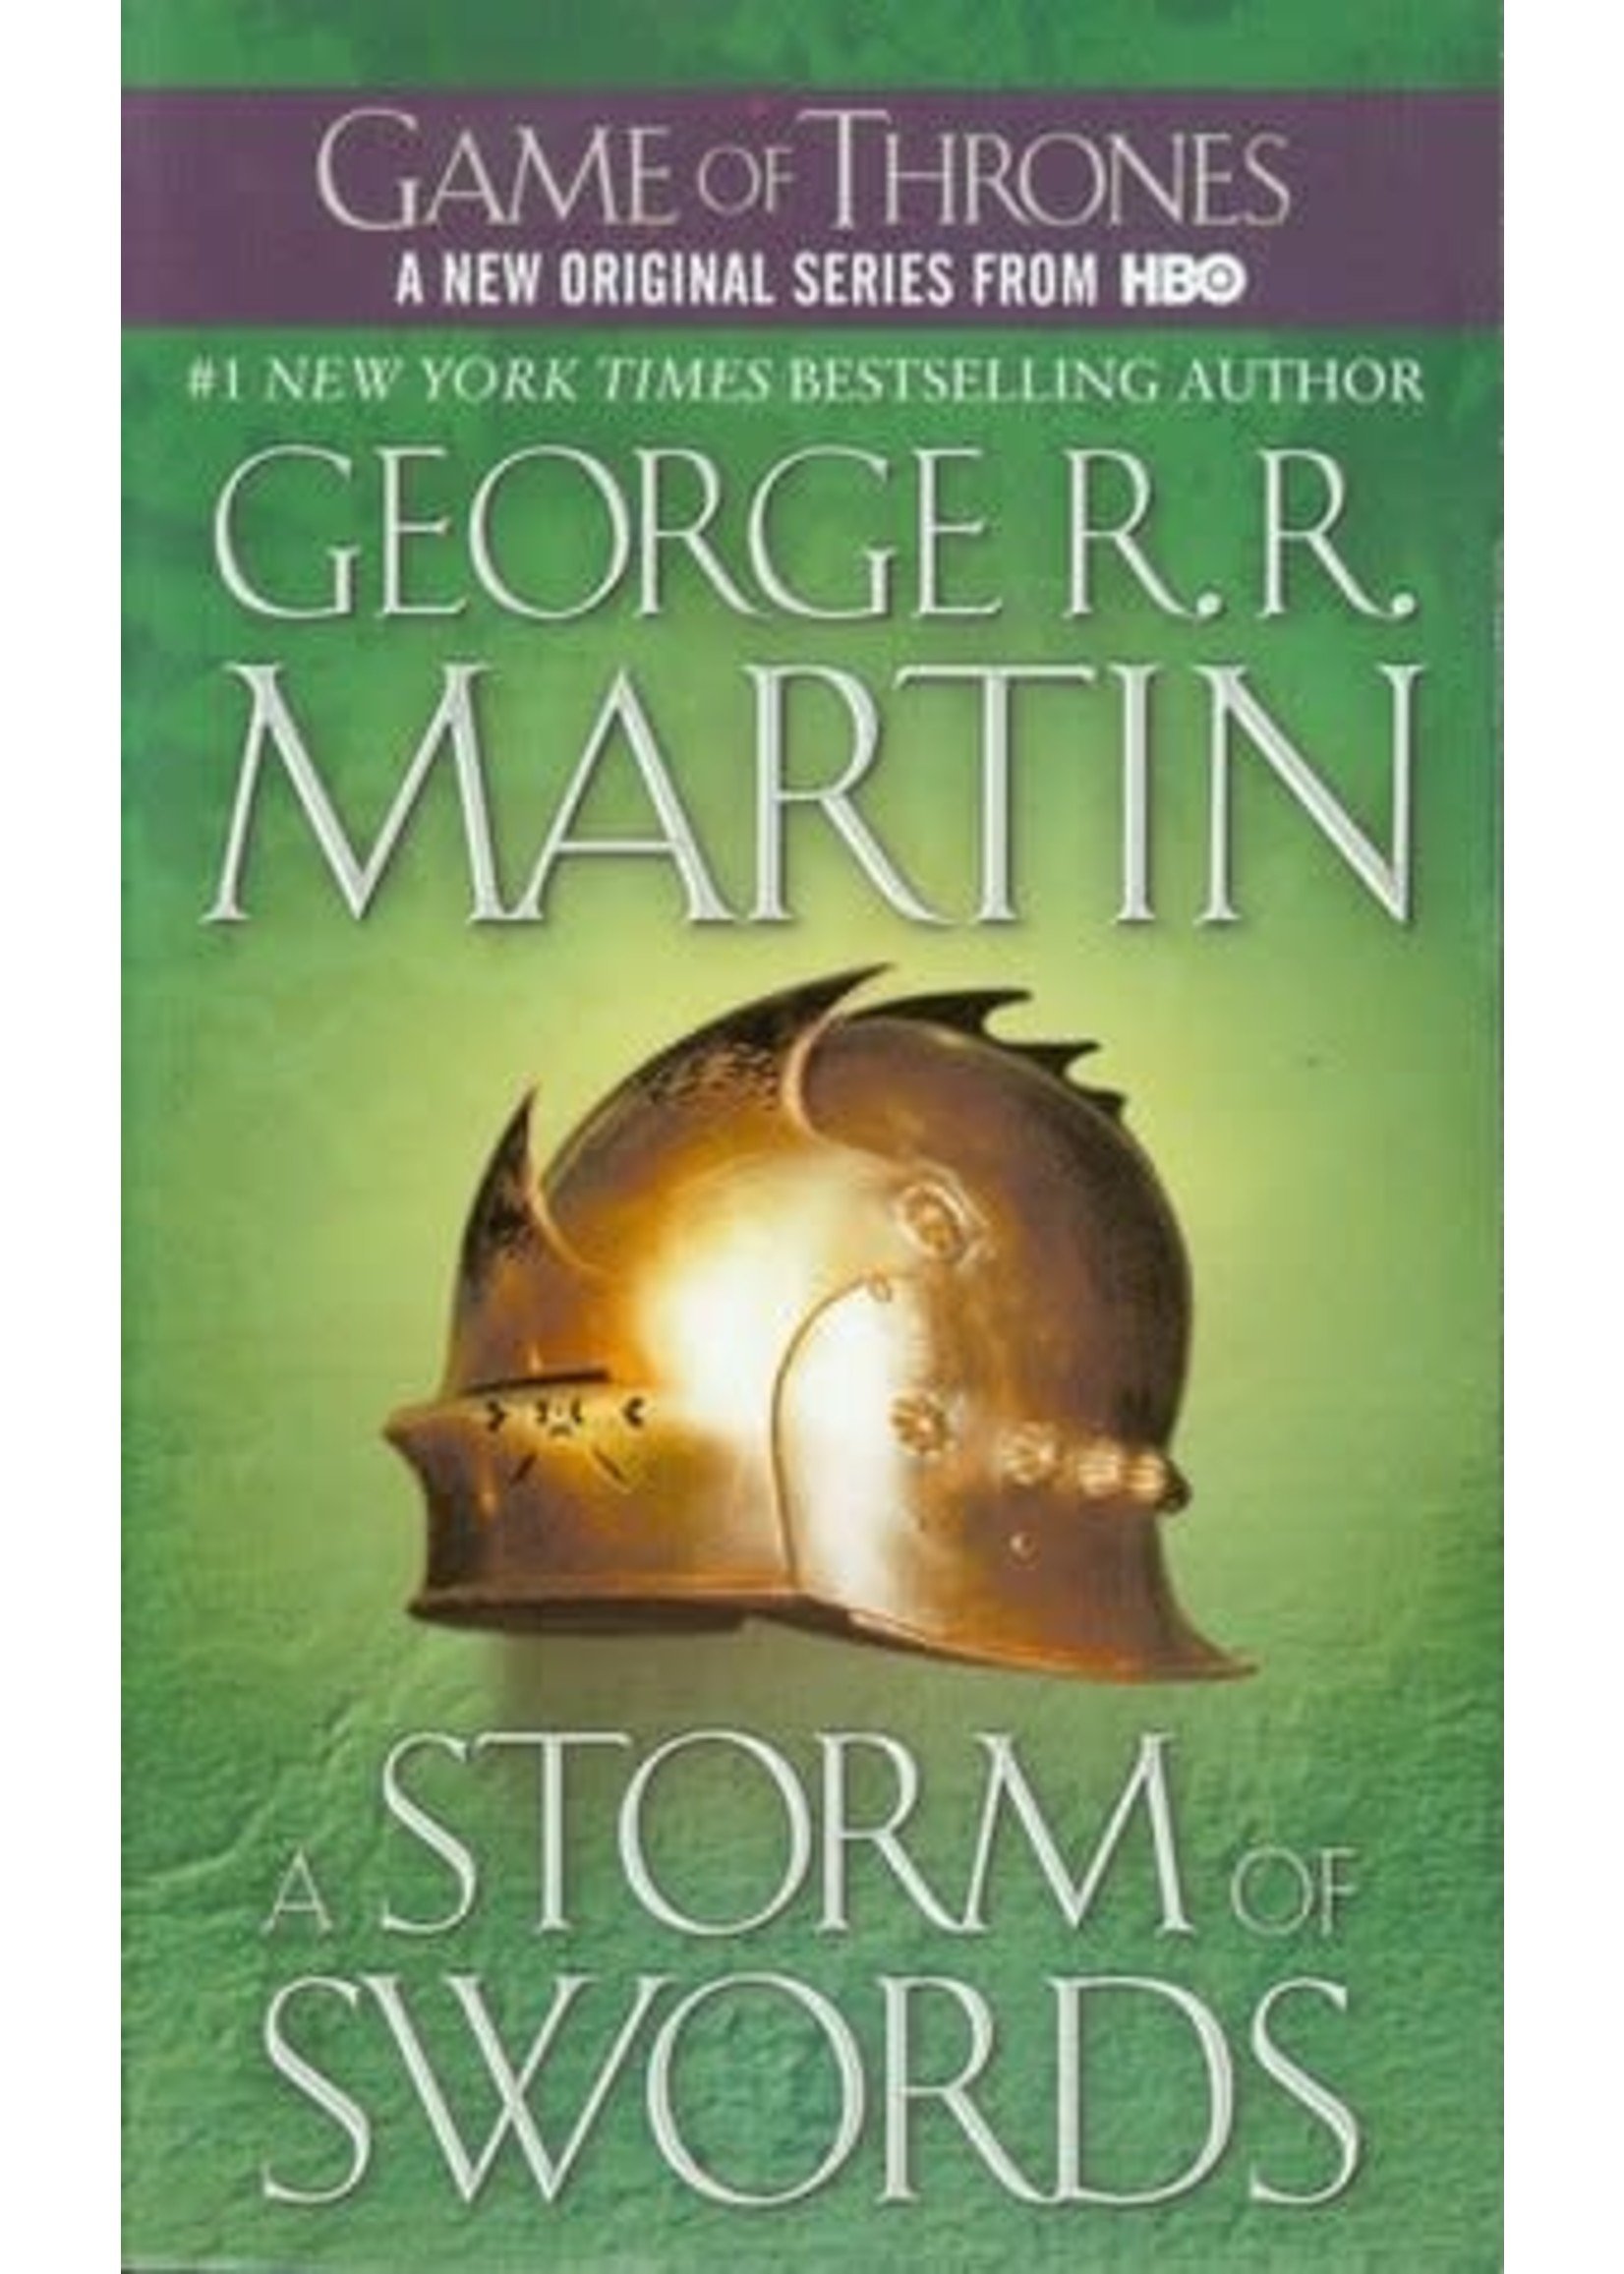 A Storm of Swords (A Song of Ice and Fire #3) by George R.R. Martin